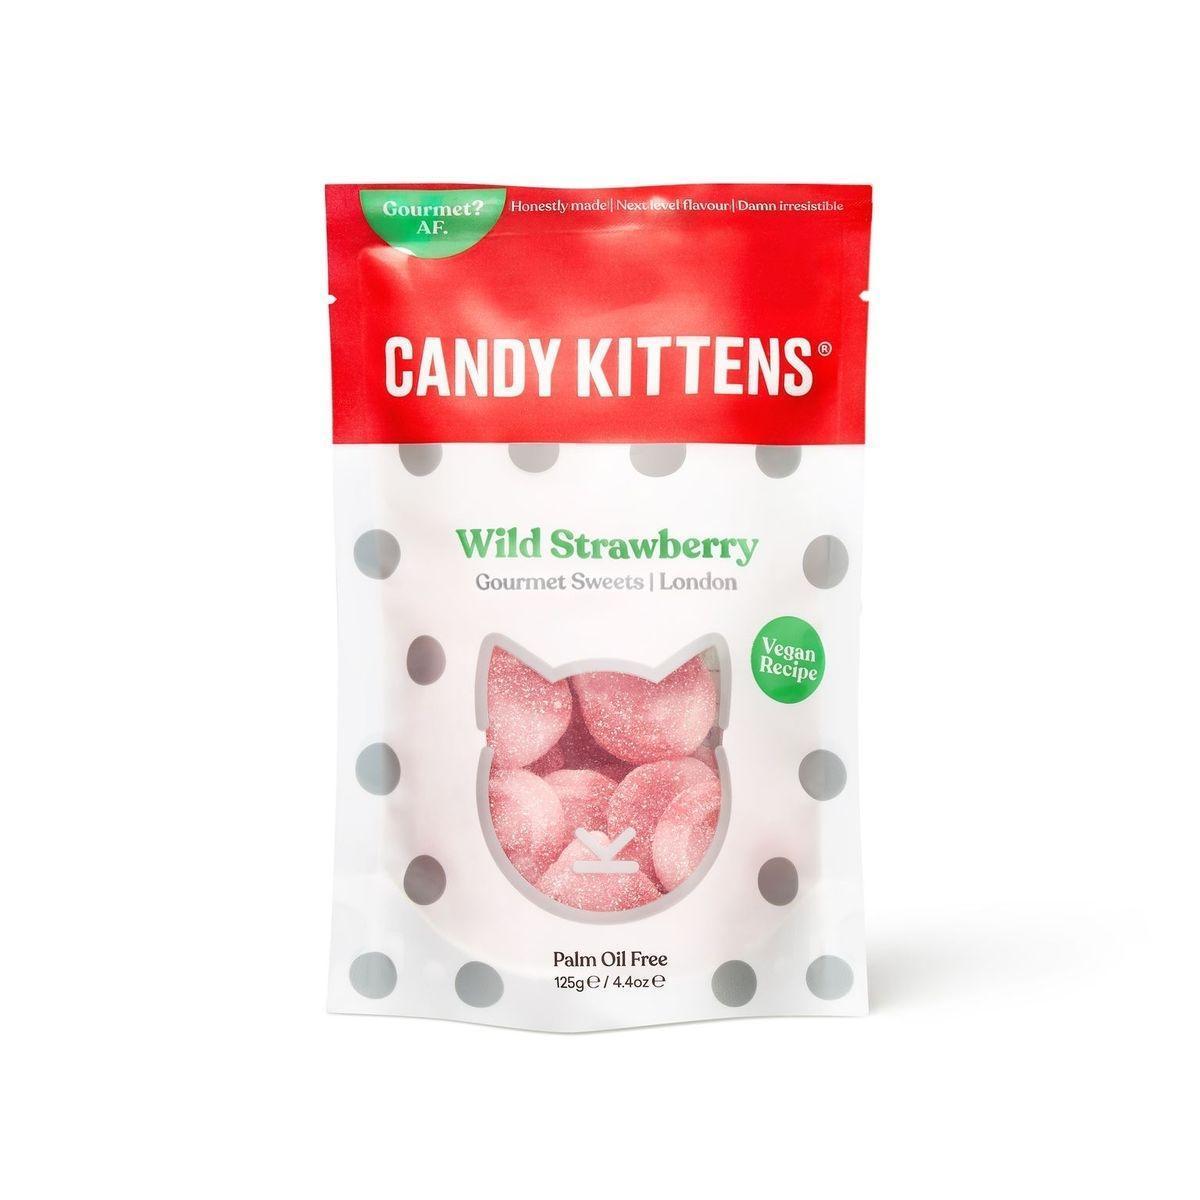 Wild Strawberry Candy Kittens Gourmet Gummy Sweets